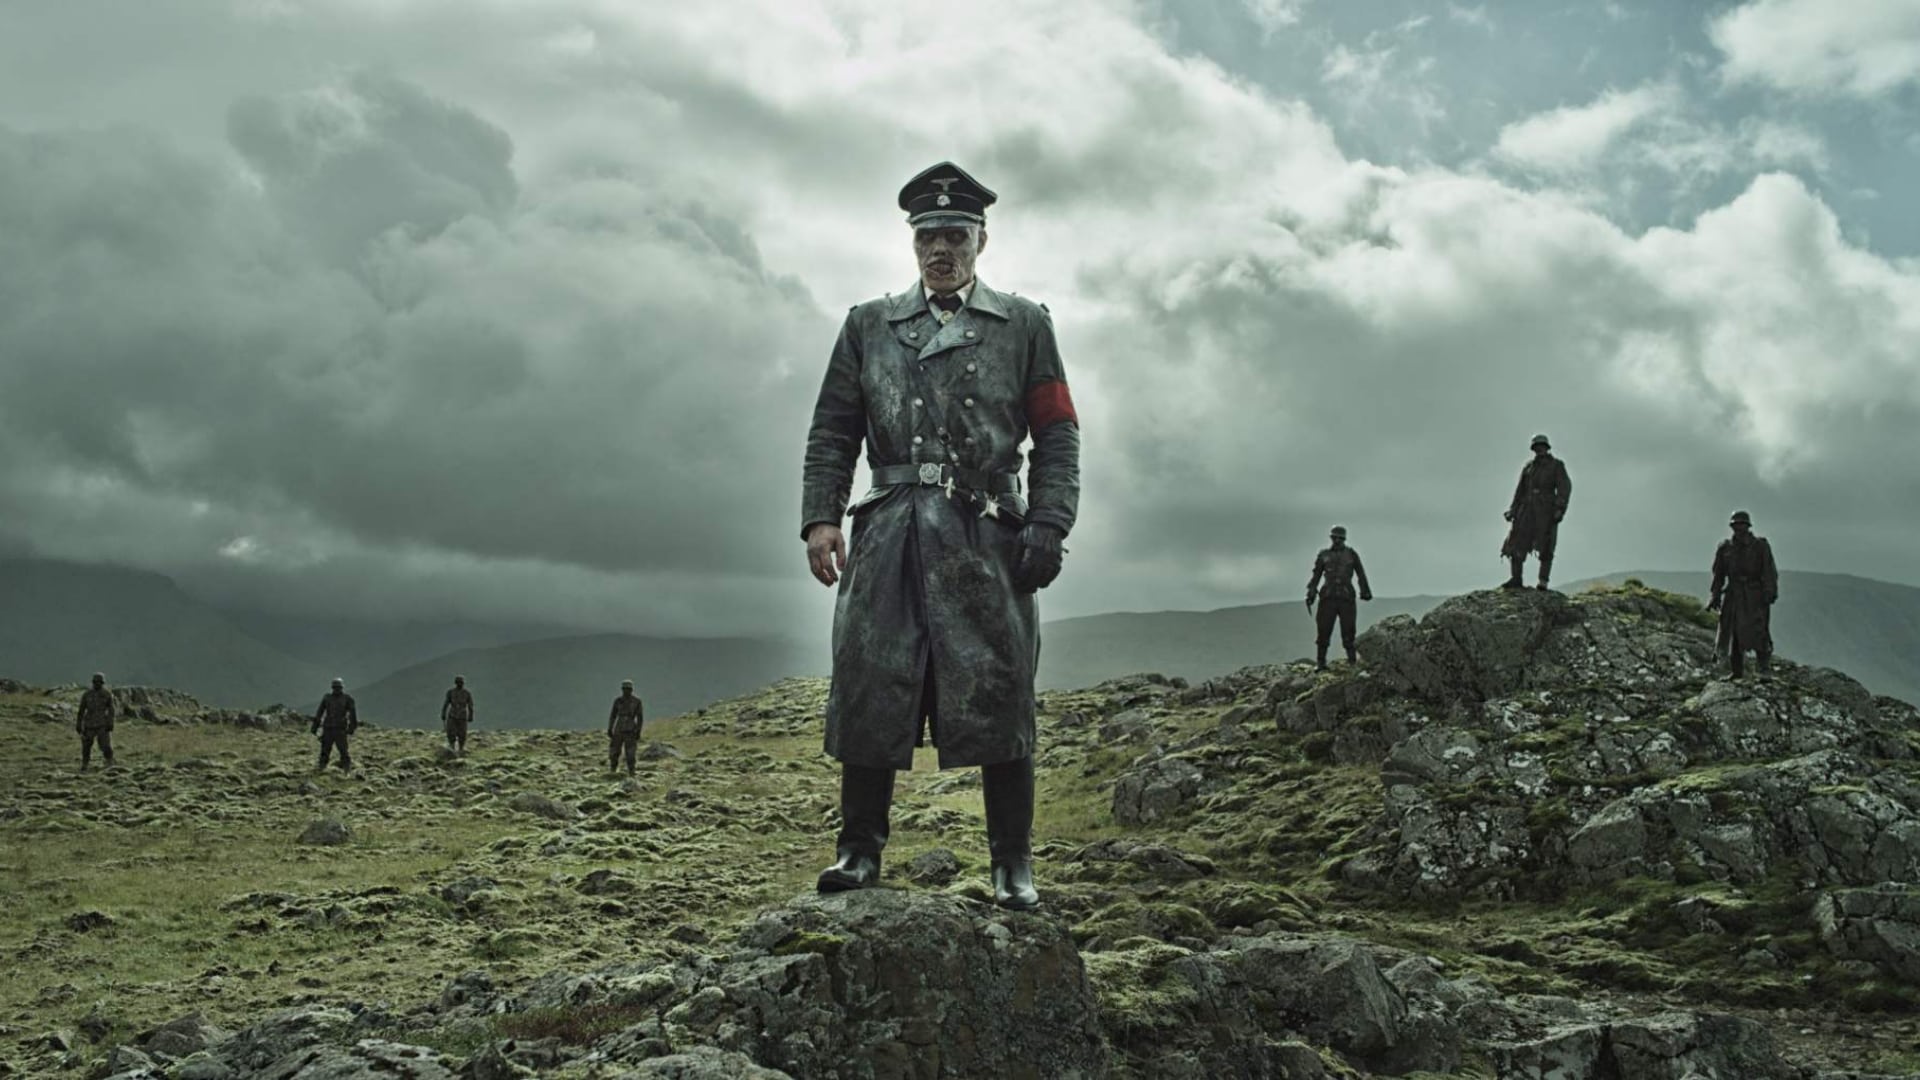 Screenshot from the film Dead Snow 2: Red vs. Dead. A zombie in a Nazi uniform stands in front of seven other zombies on a rocky terrain. 